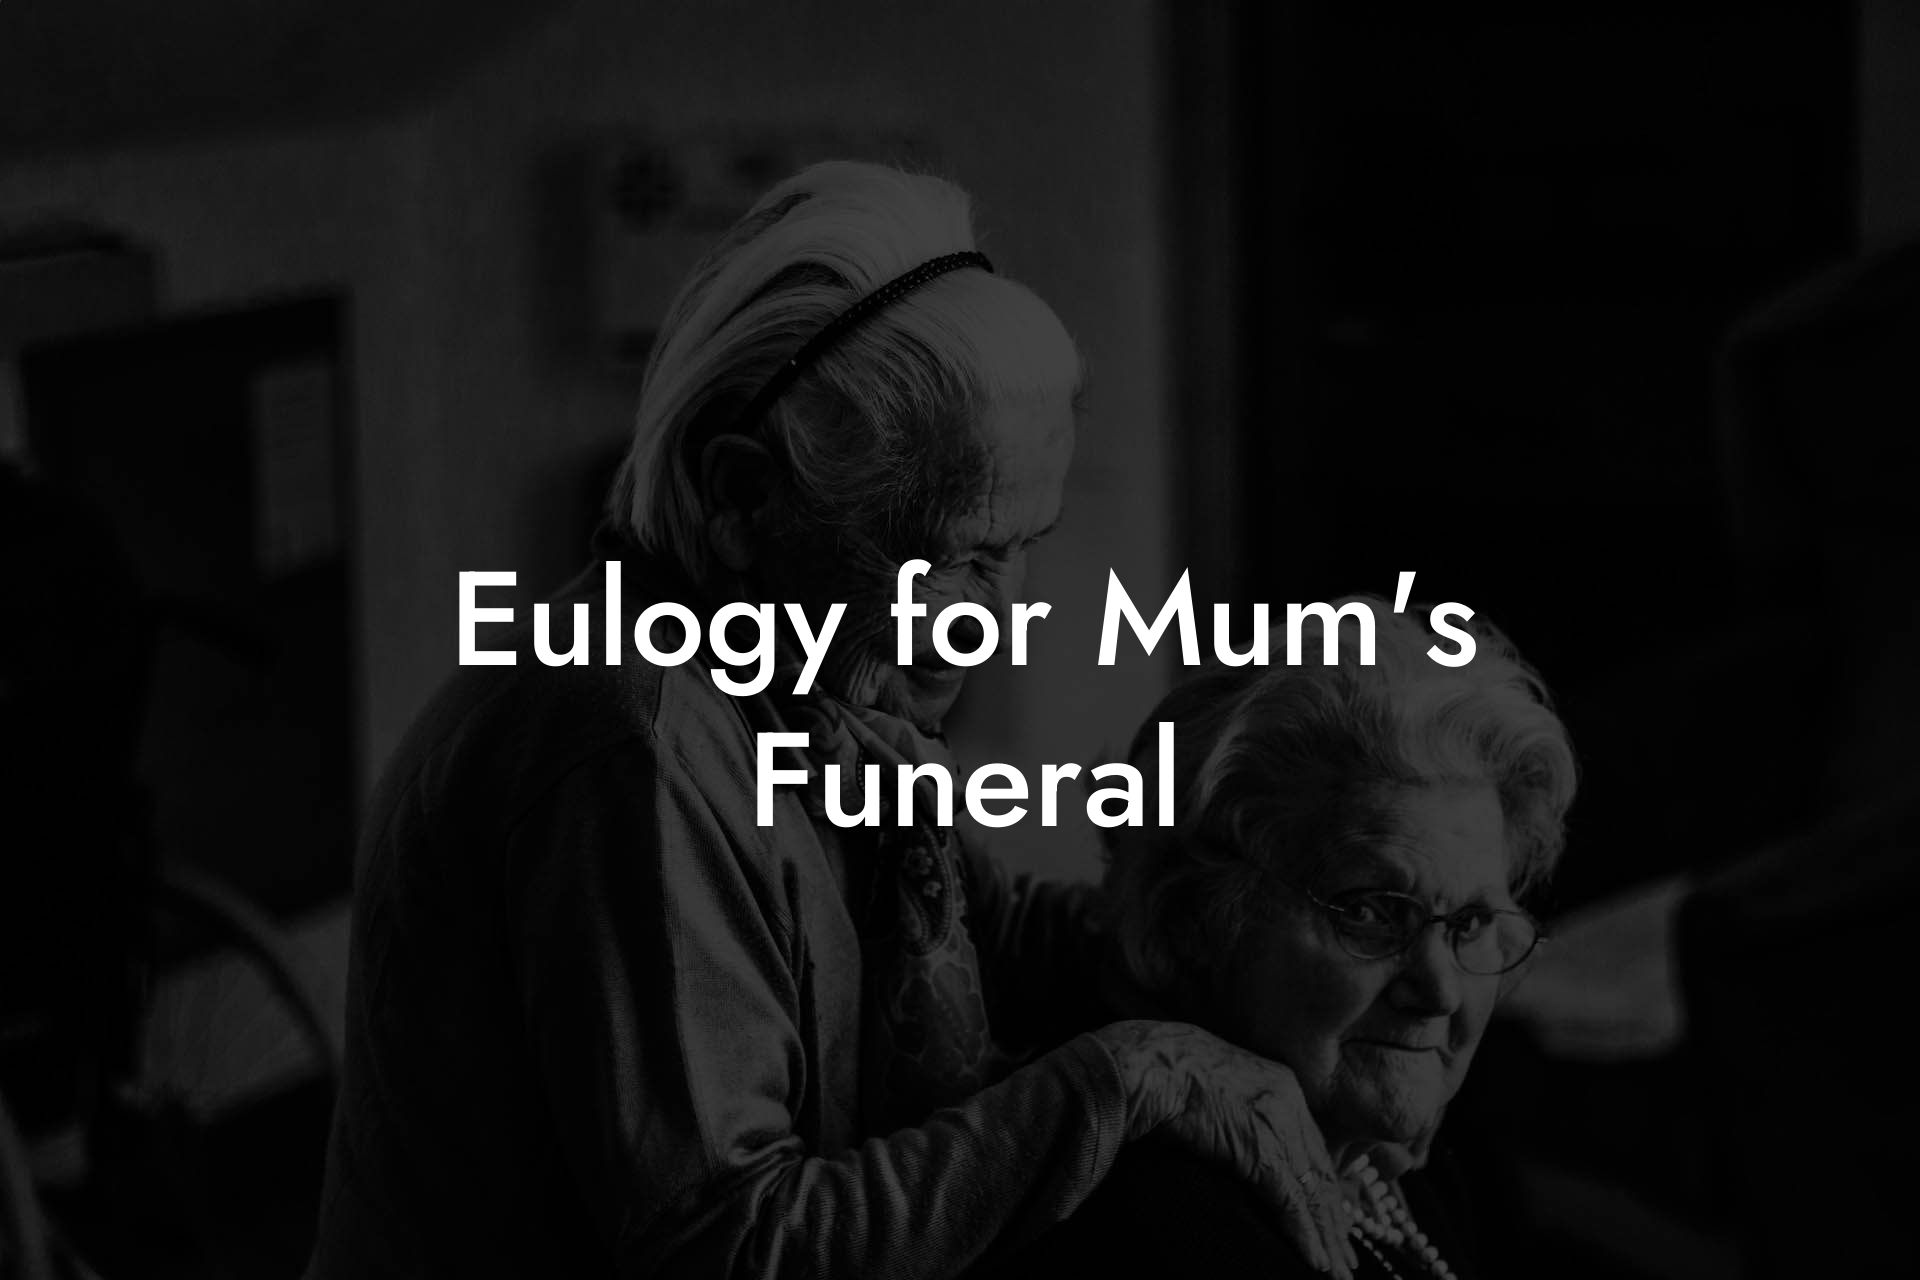 Eulogy for Mum's Funeral